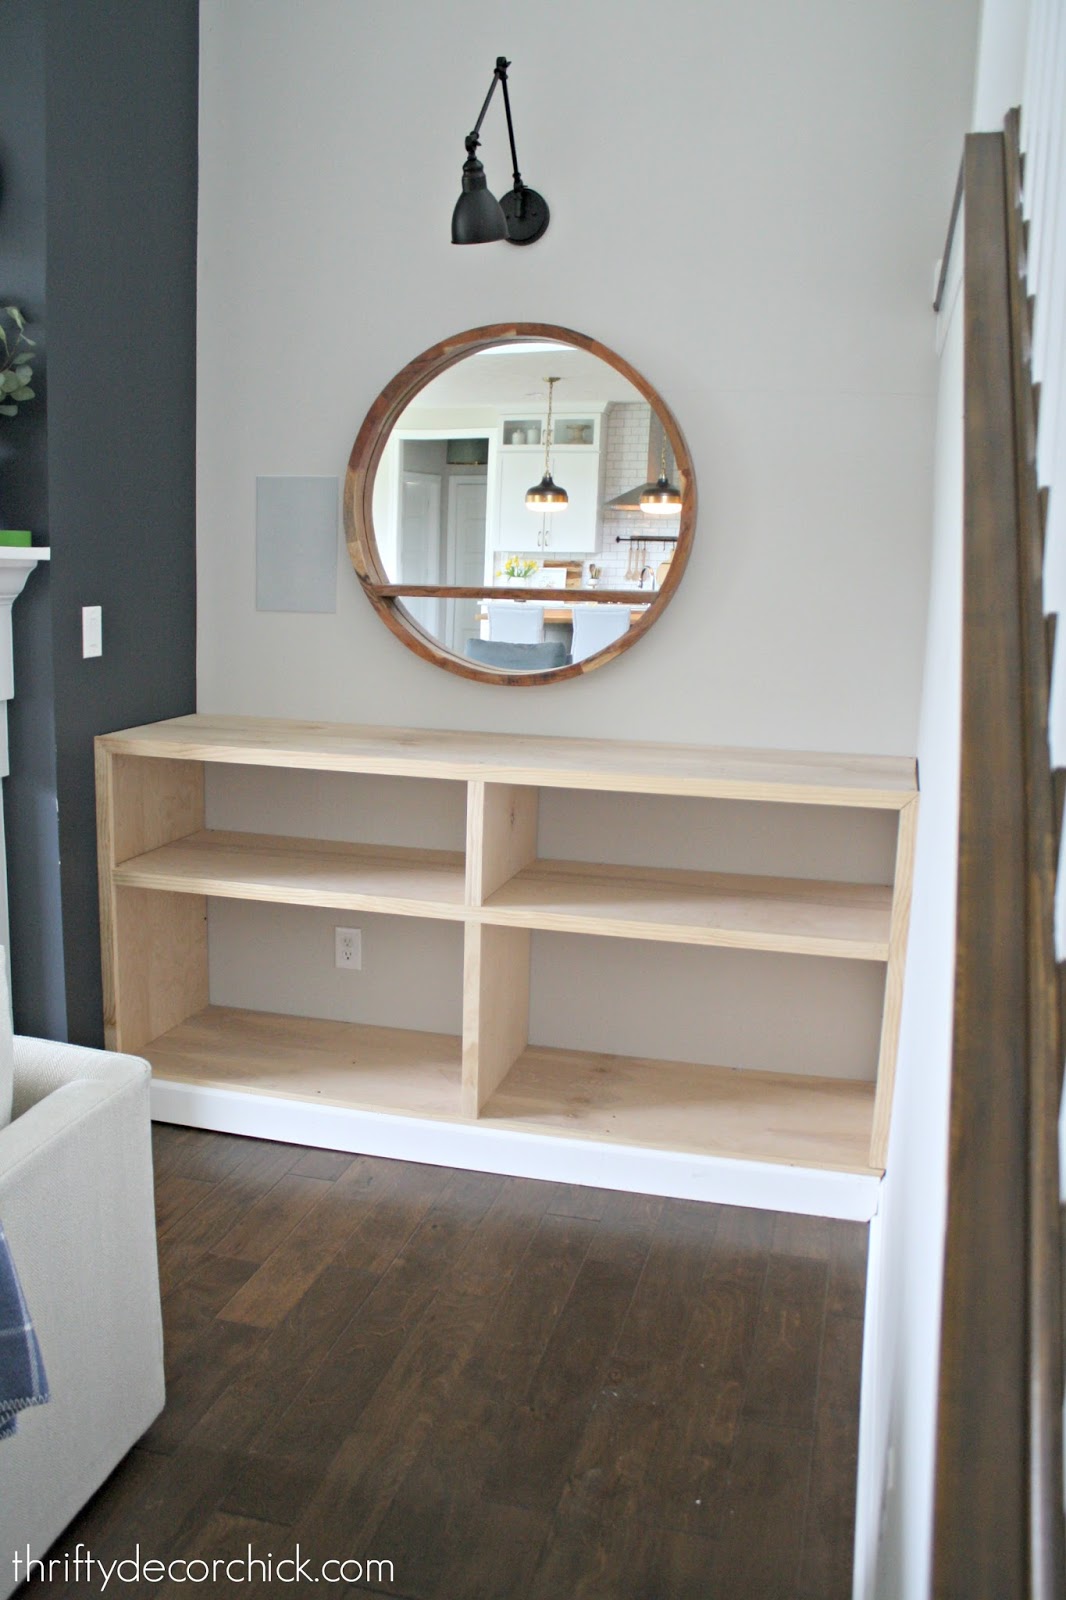 Diy Bookcases By The Fireplace, How To Build Bookcases Around A Fireplace